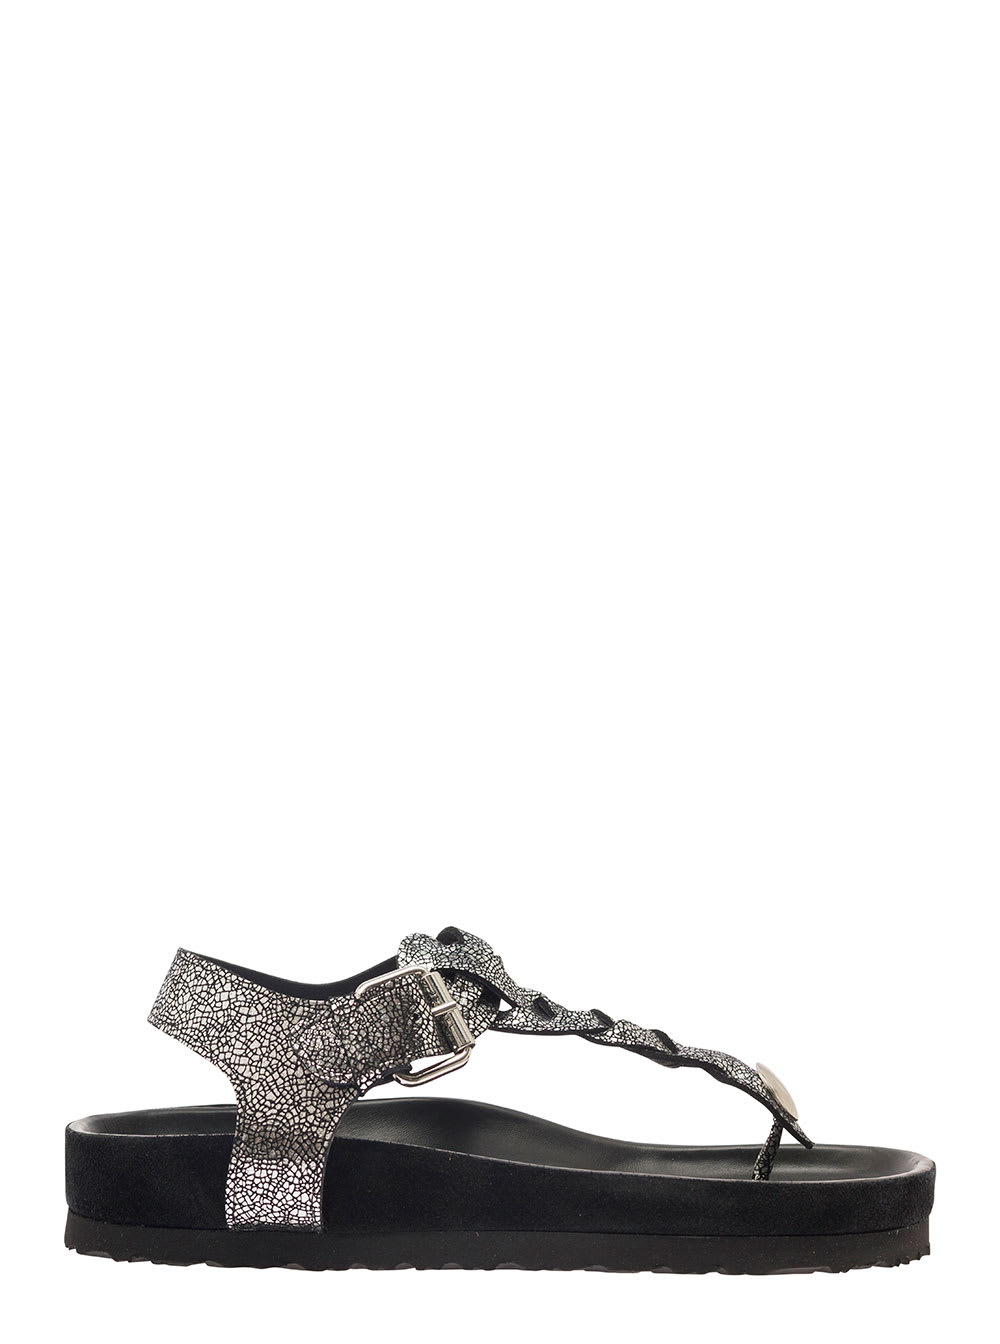 ISABEL MARANT BROOK SILVER SANDALS WITH BRAIDED DESIGN IN METALLIC LEATHER WOMAN